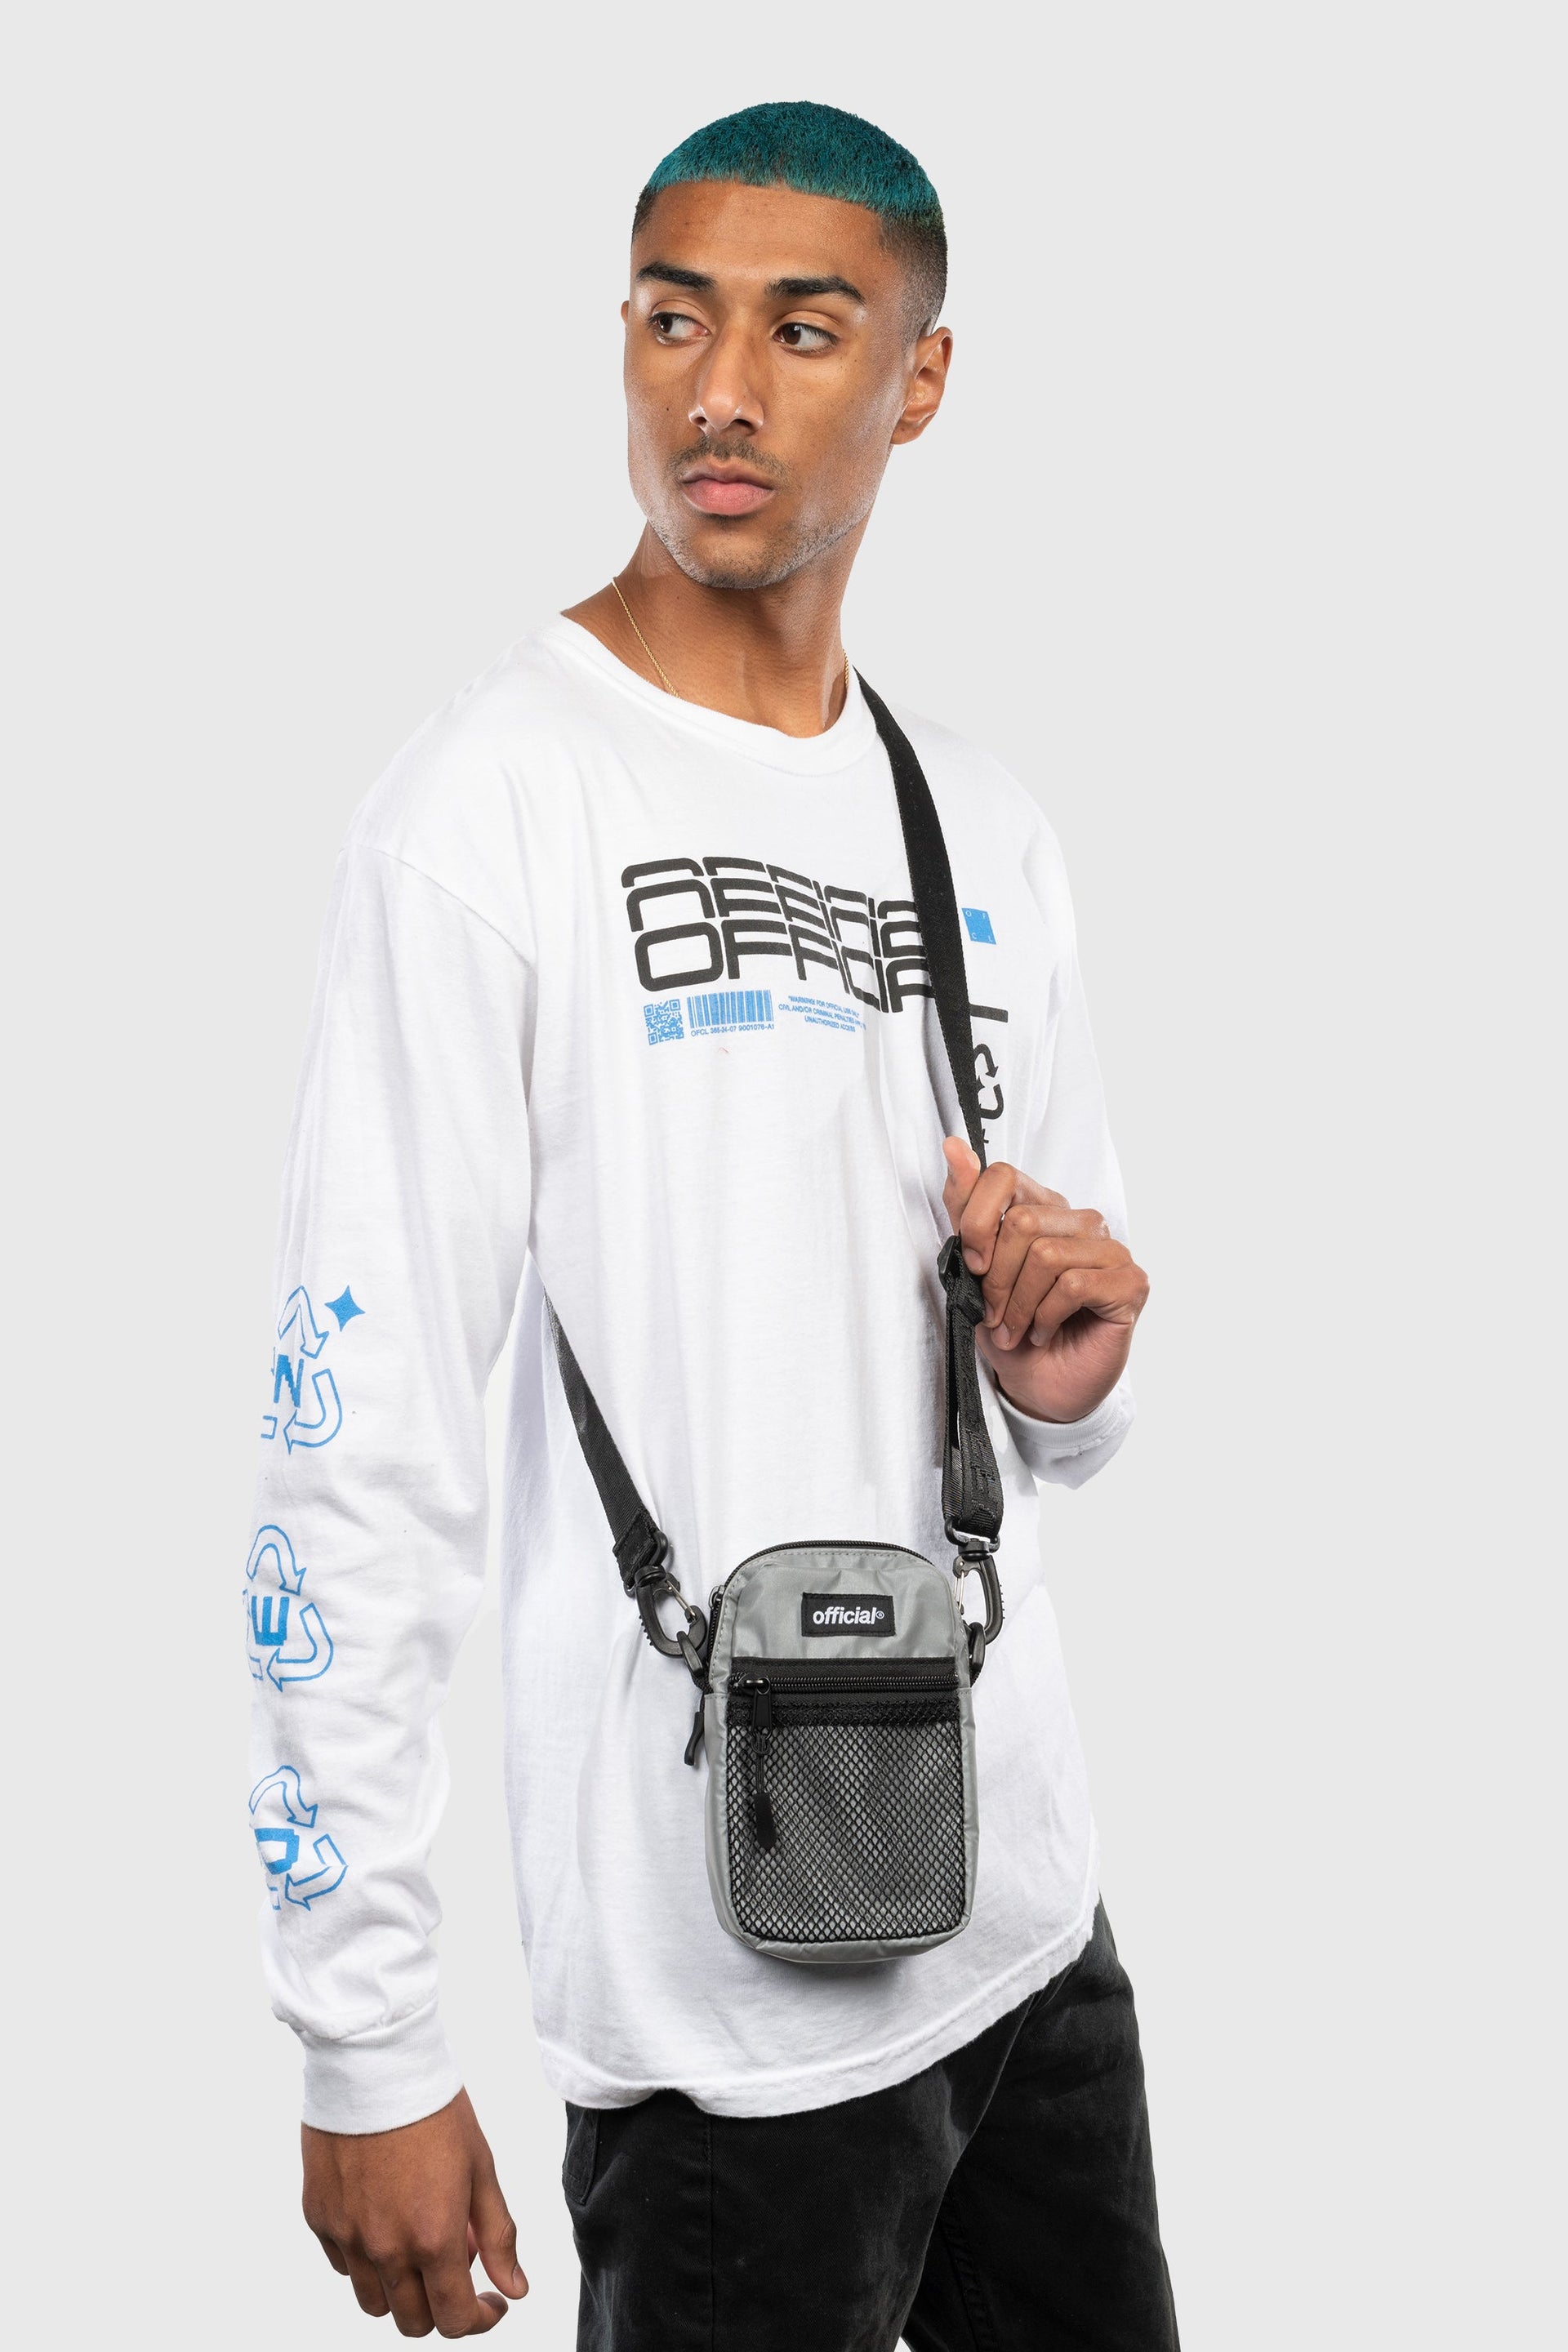 The Reflective 3M Essential Nylon Shoulder Bag Streetwear | Official Reflective Silver being worn